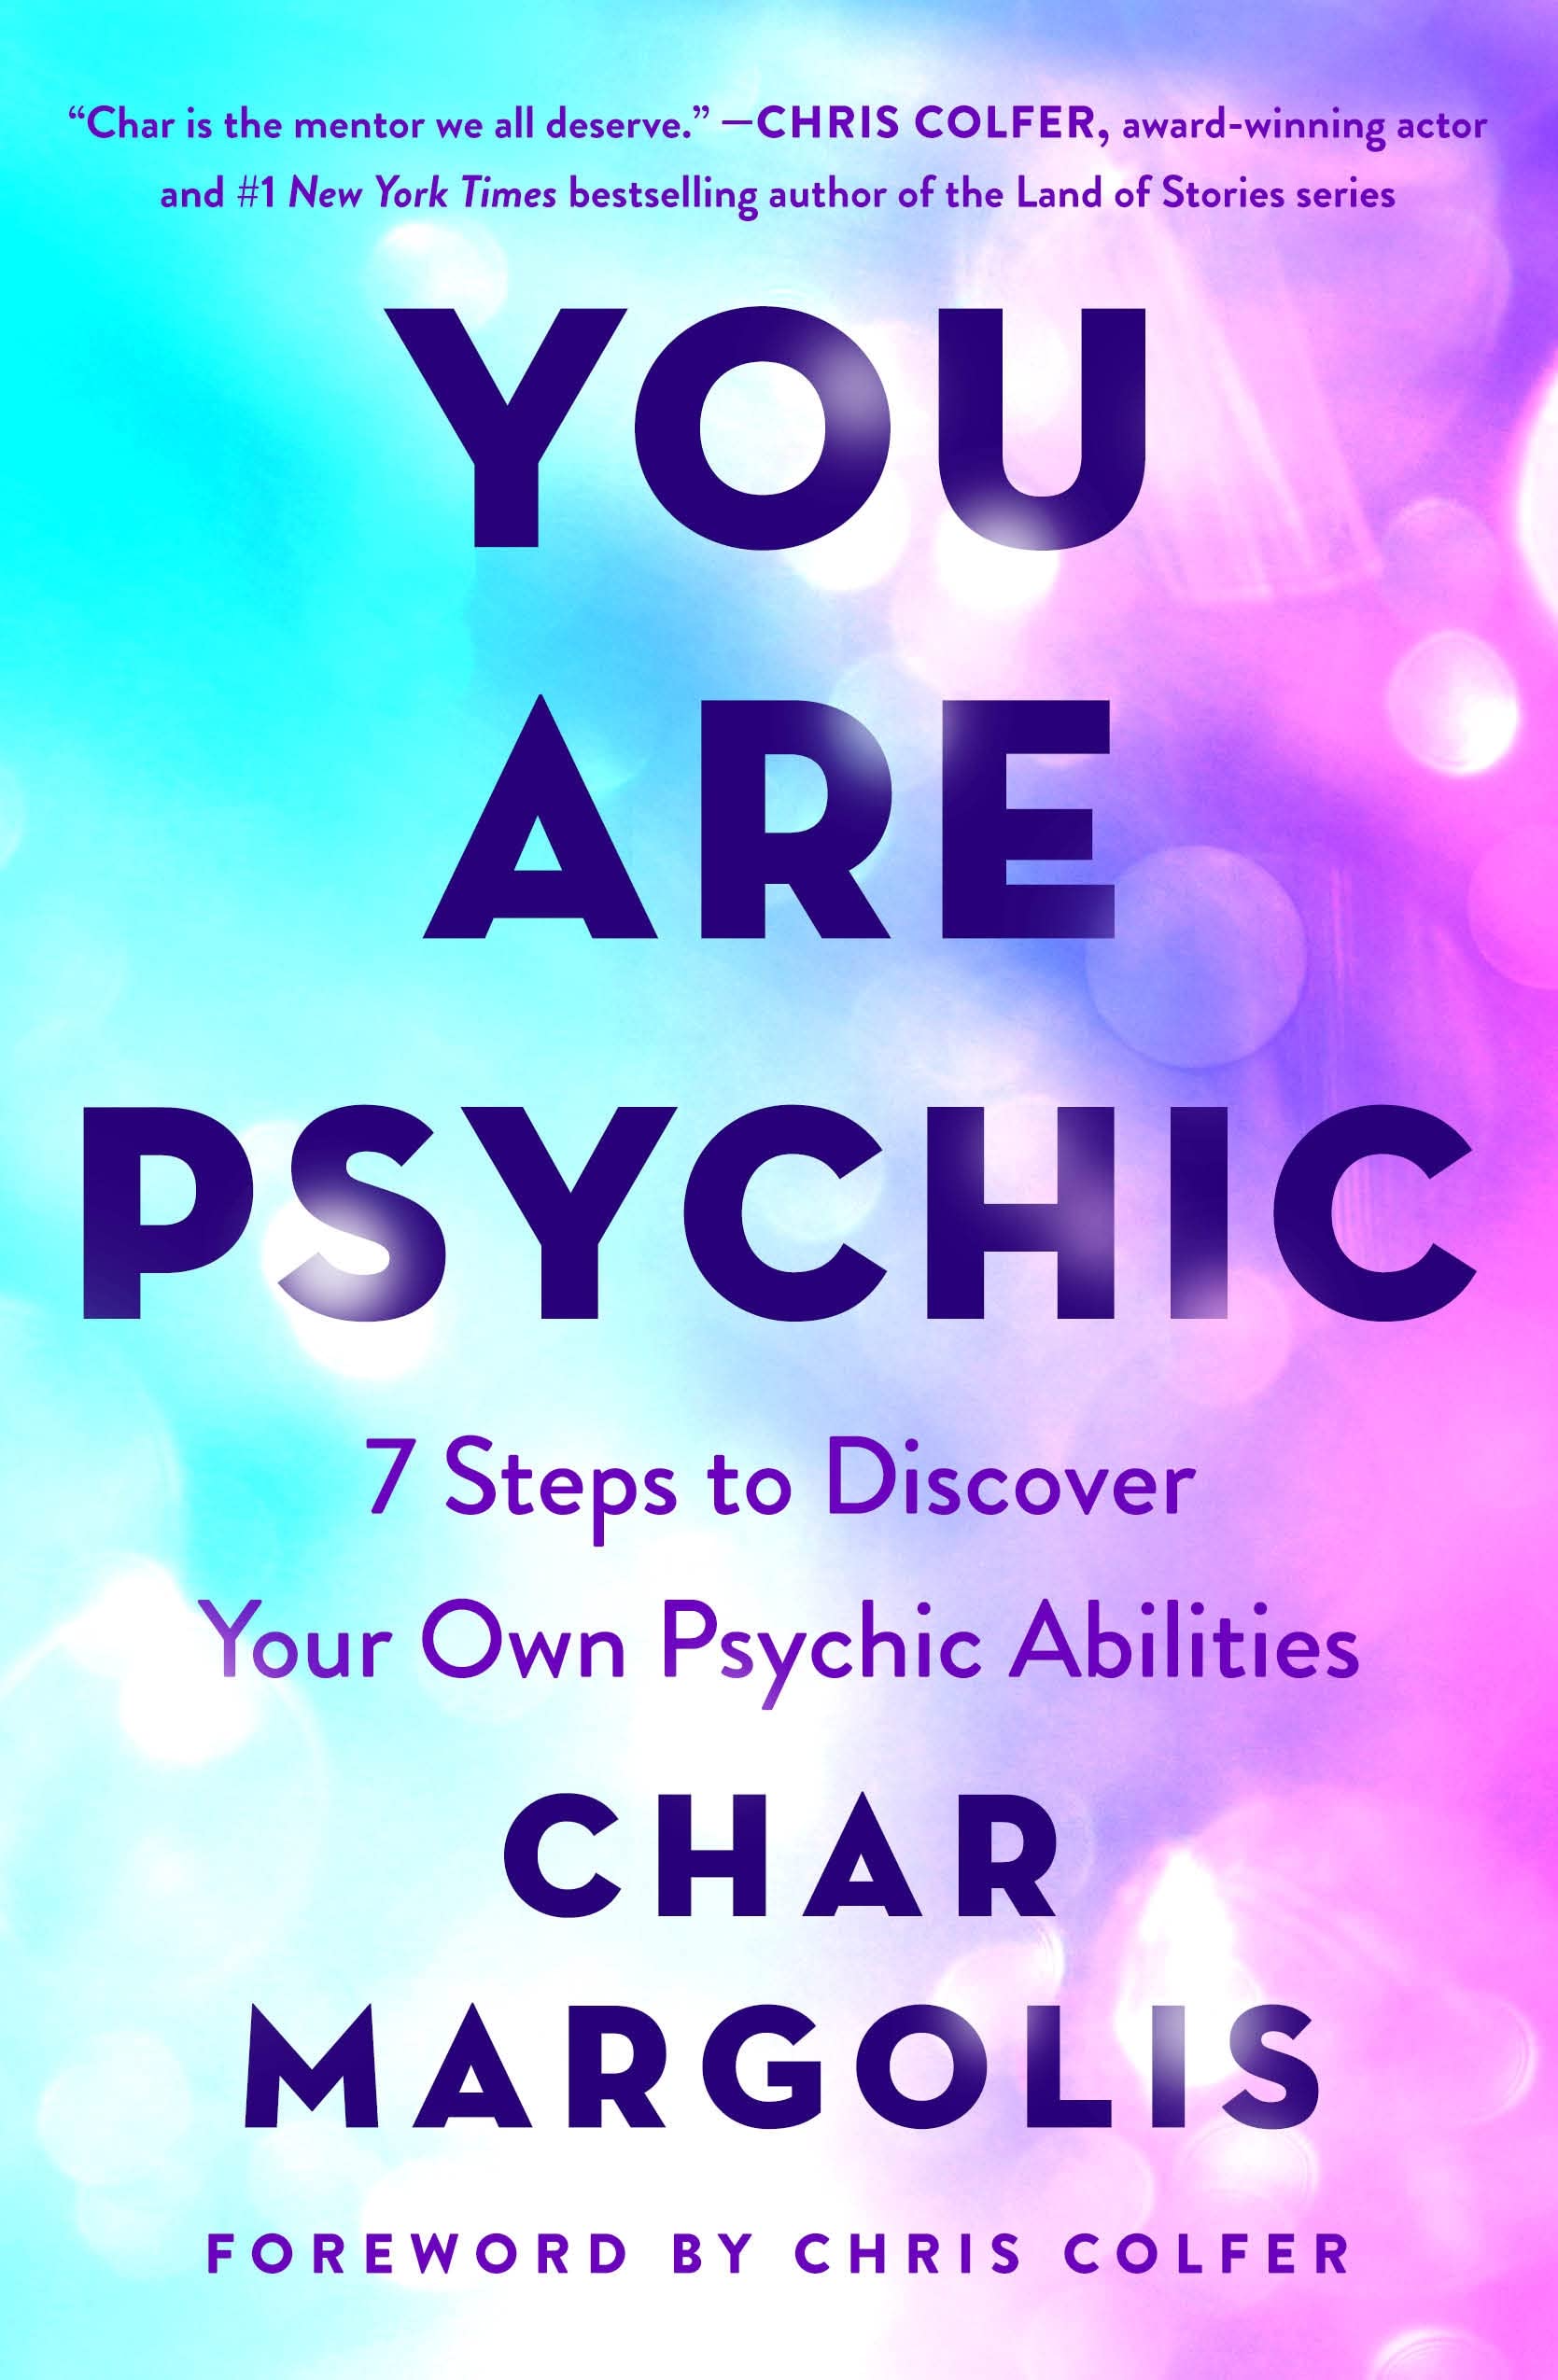 You Are Psychic: 7 Steps to Discover Your Own Psychic Abilities by Margolis, Char